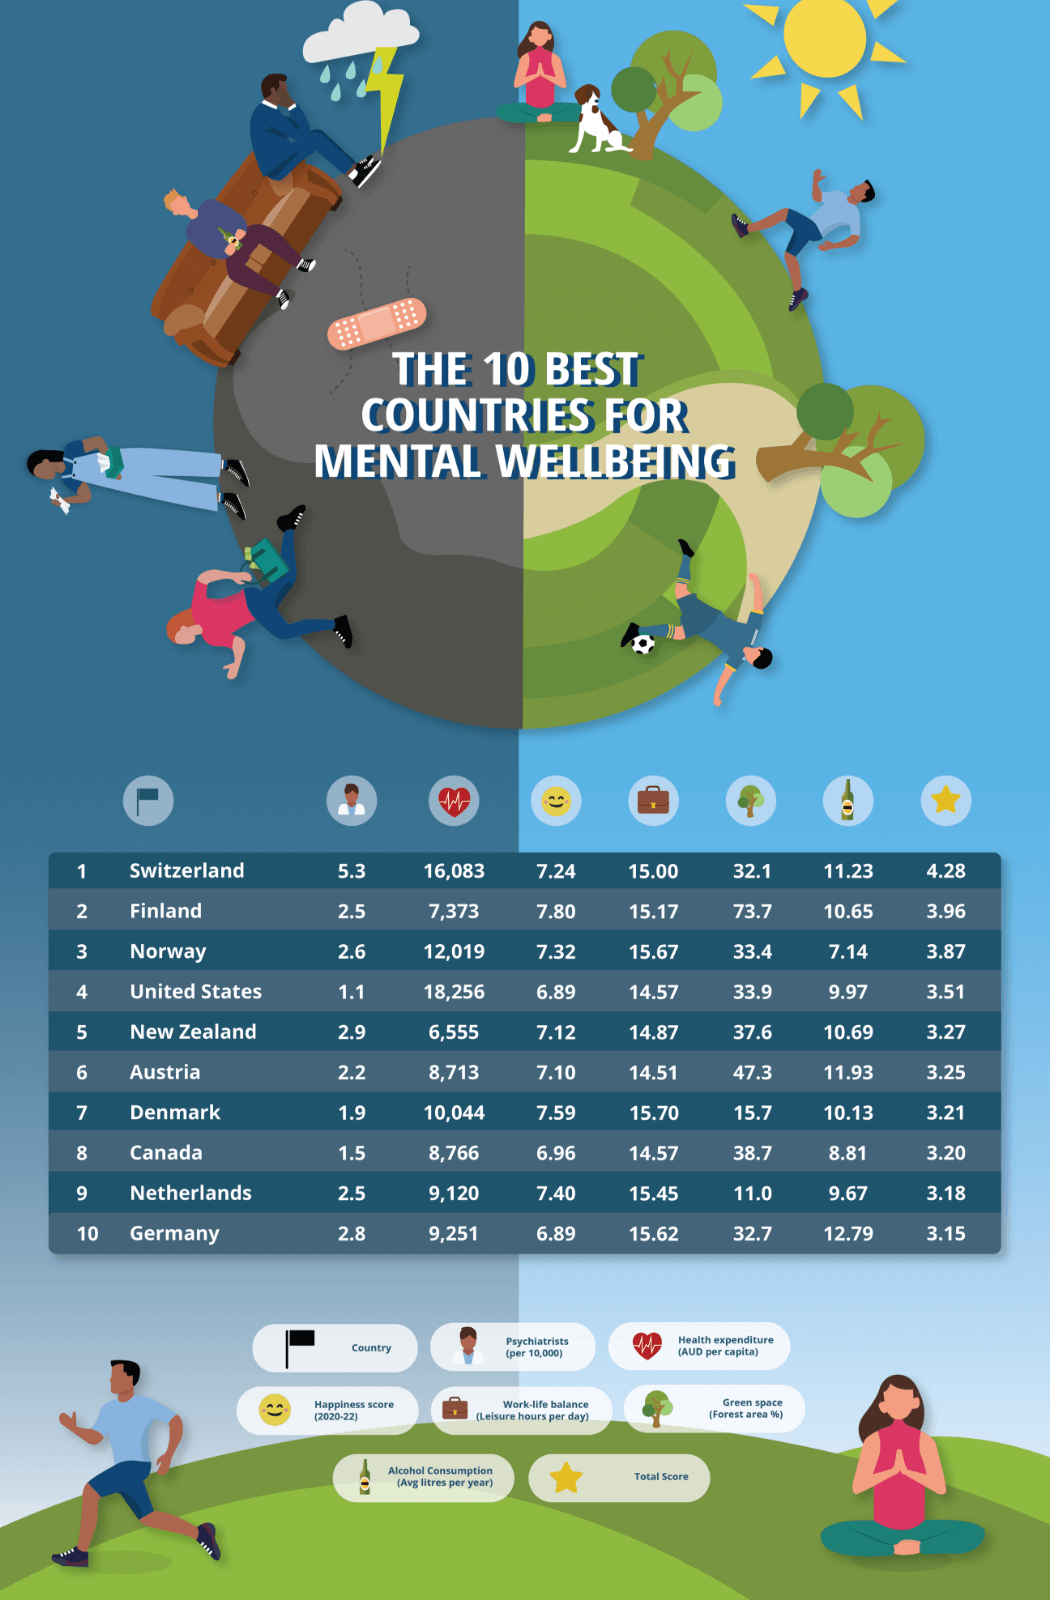 Table showing the ten best countries for mental wellbeing.